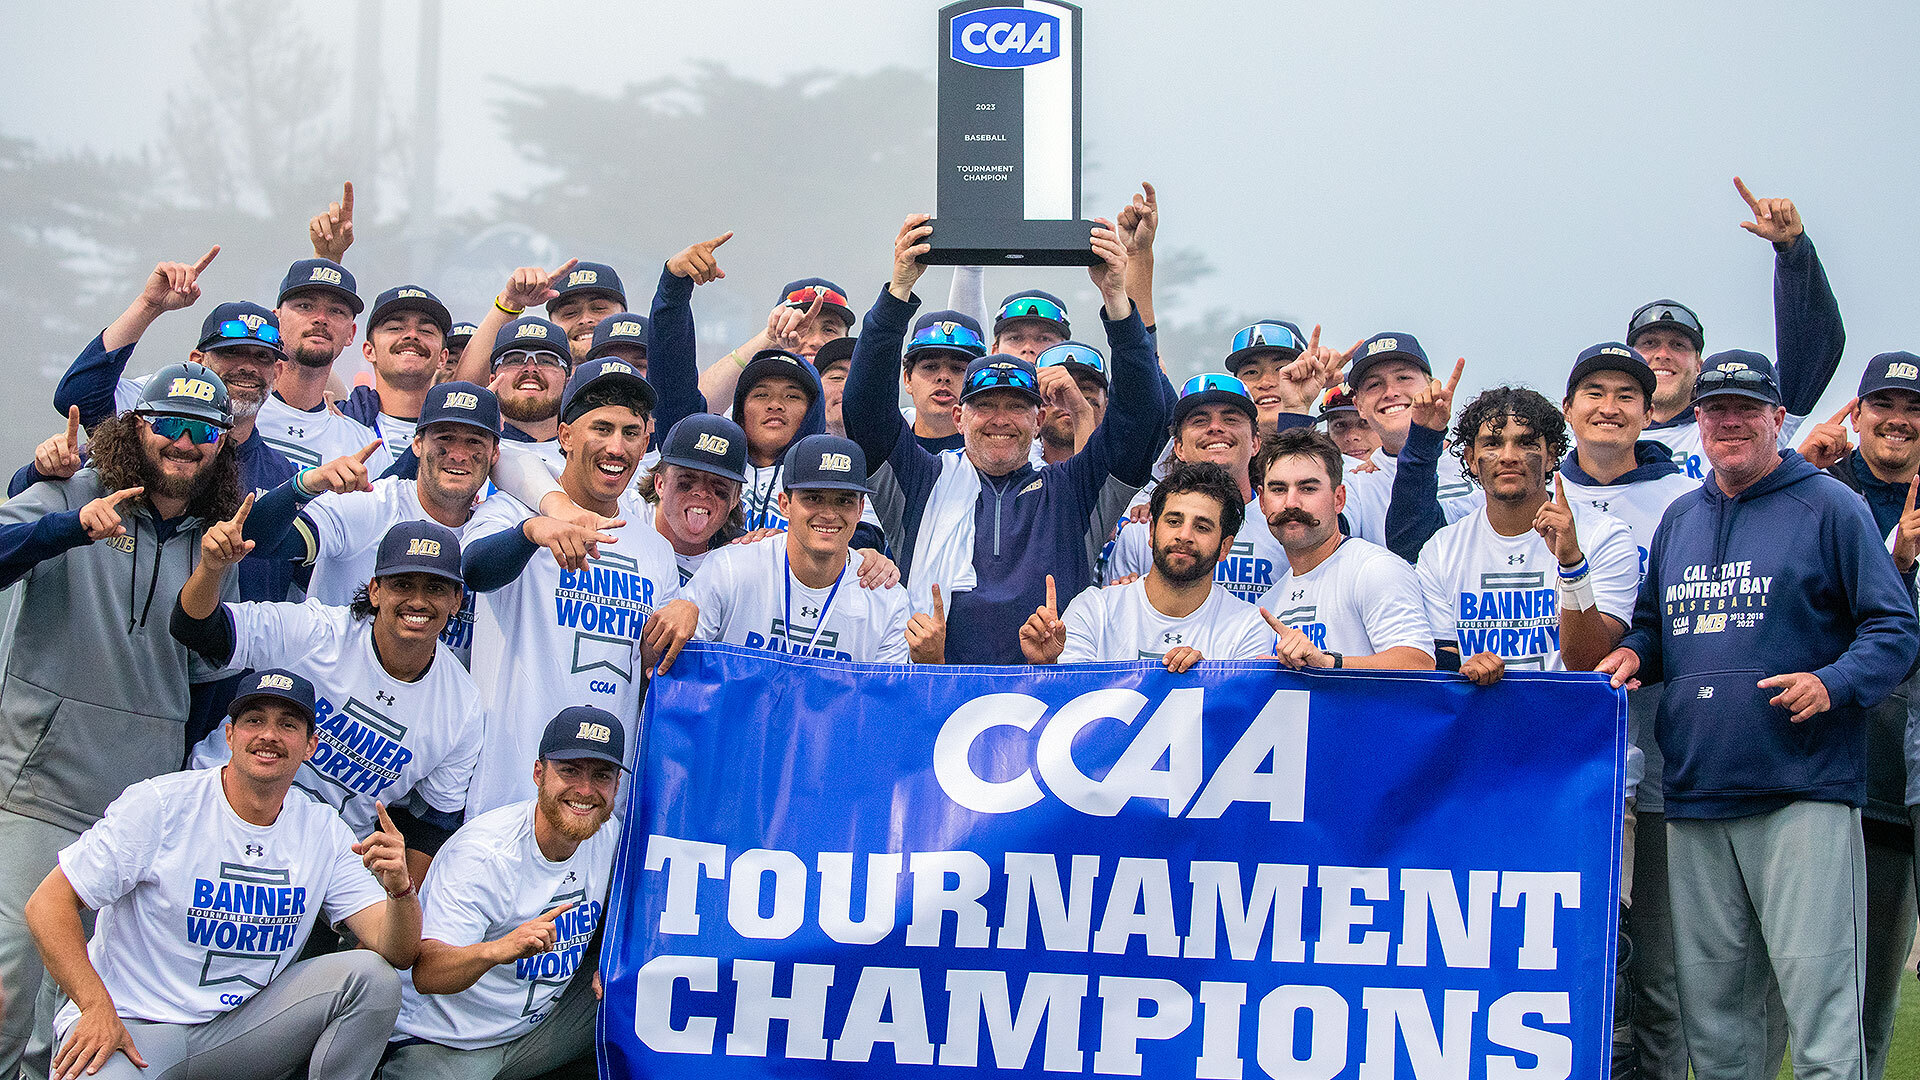 CSUMB Baseball Team holding the CCAA Tournament Championship trophy and banner